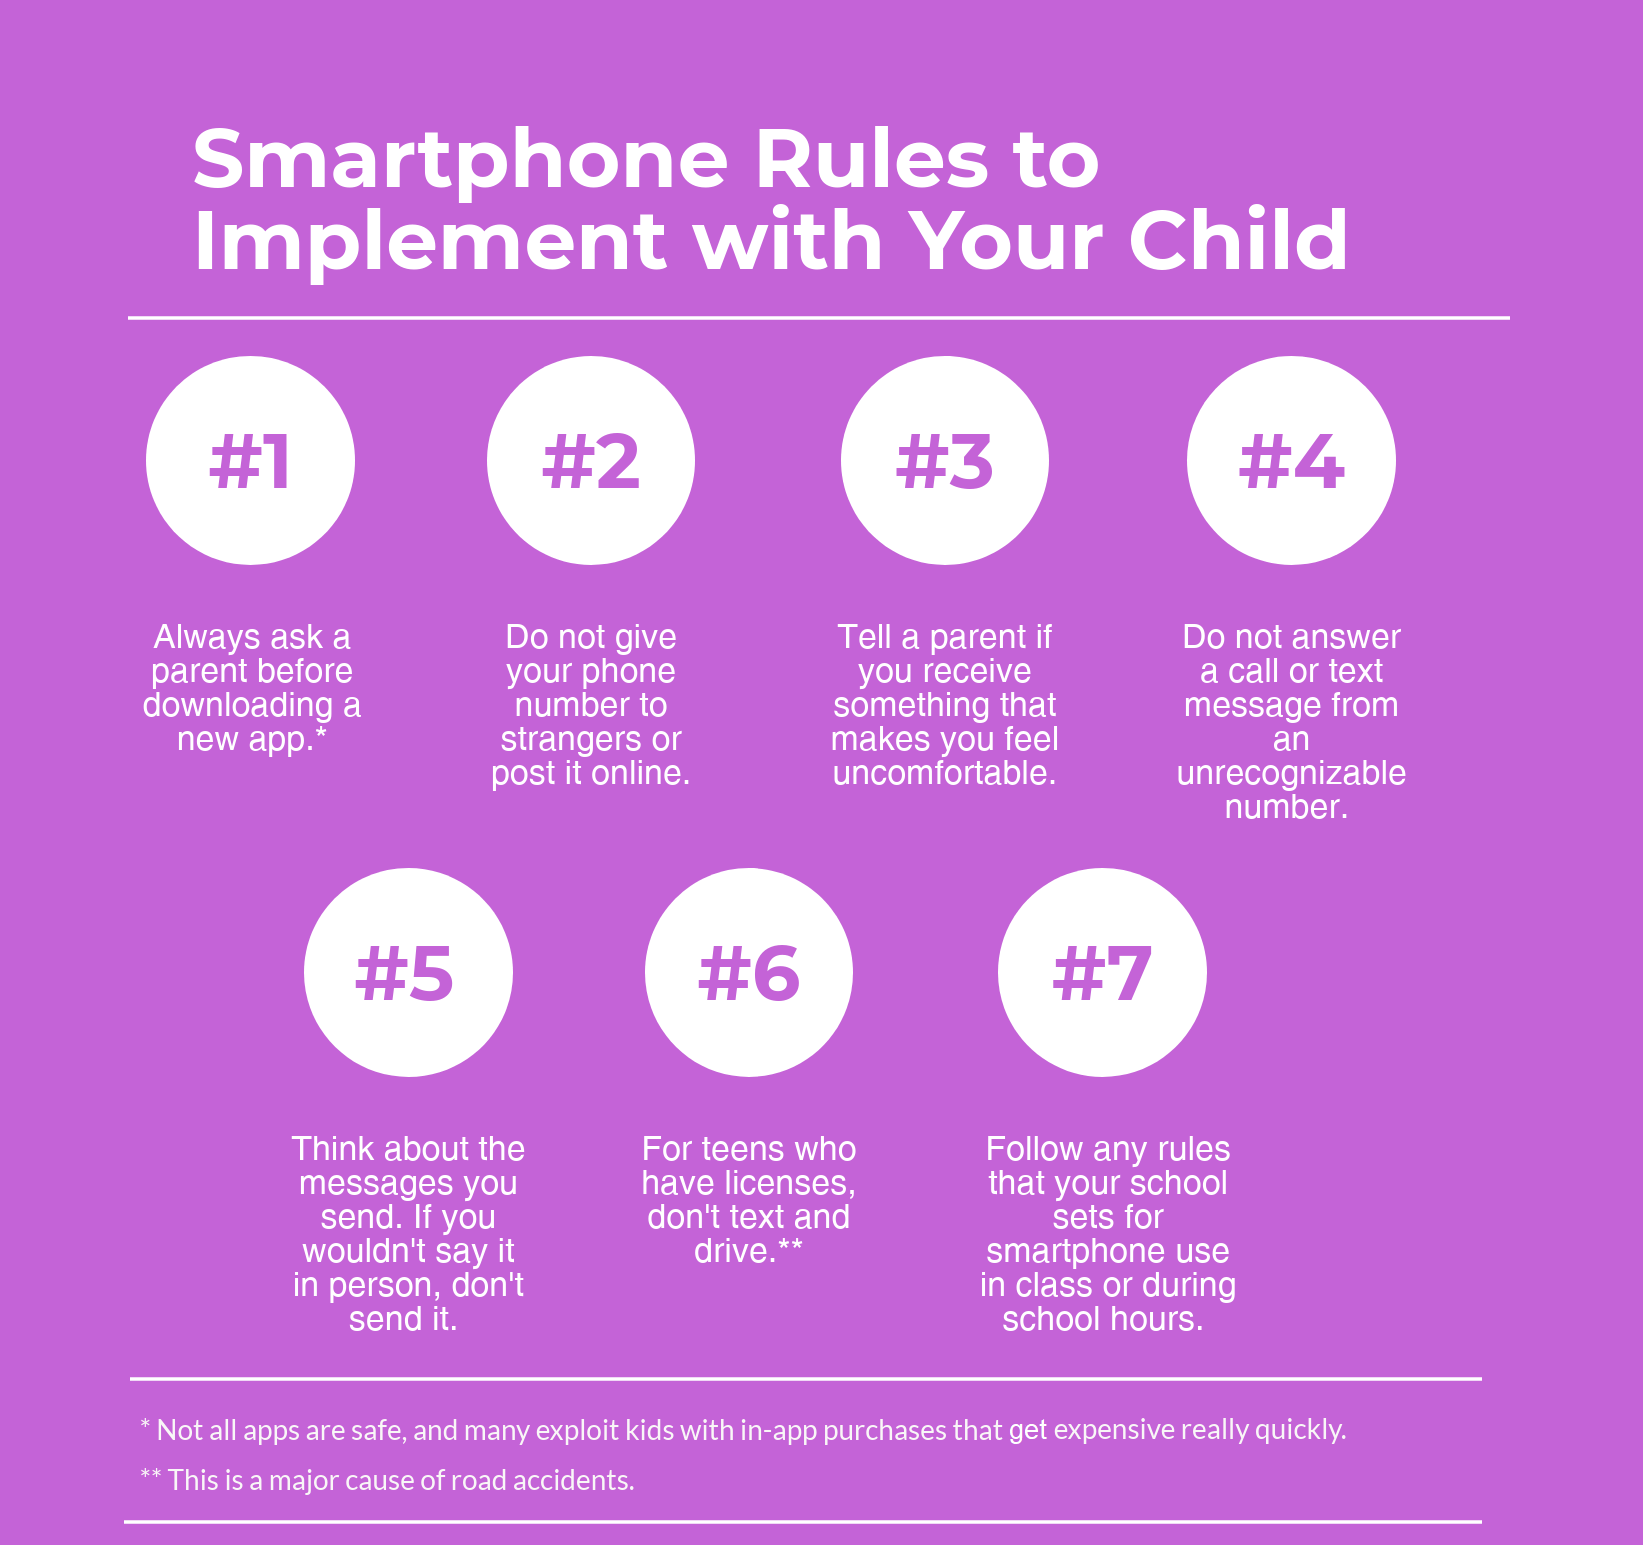 Mobile phones and apps: The Ultimate Parent Guide for Protecting Your Child on the Internet